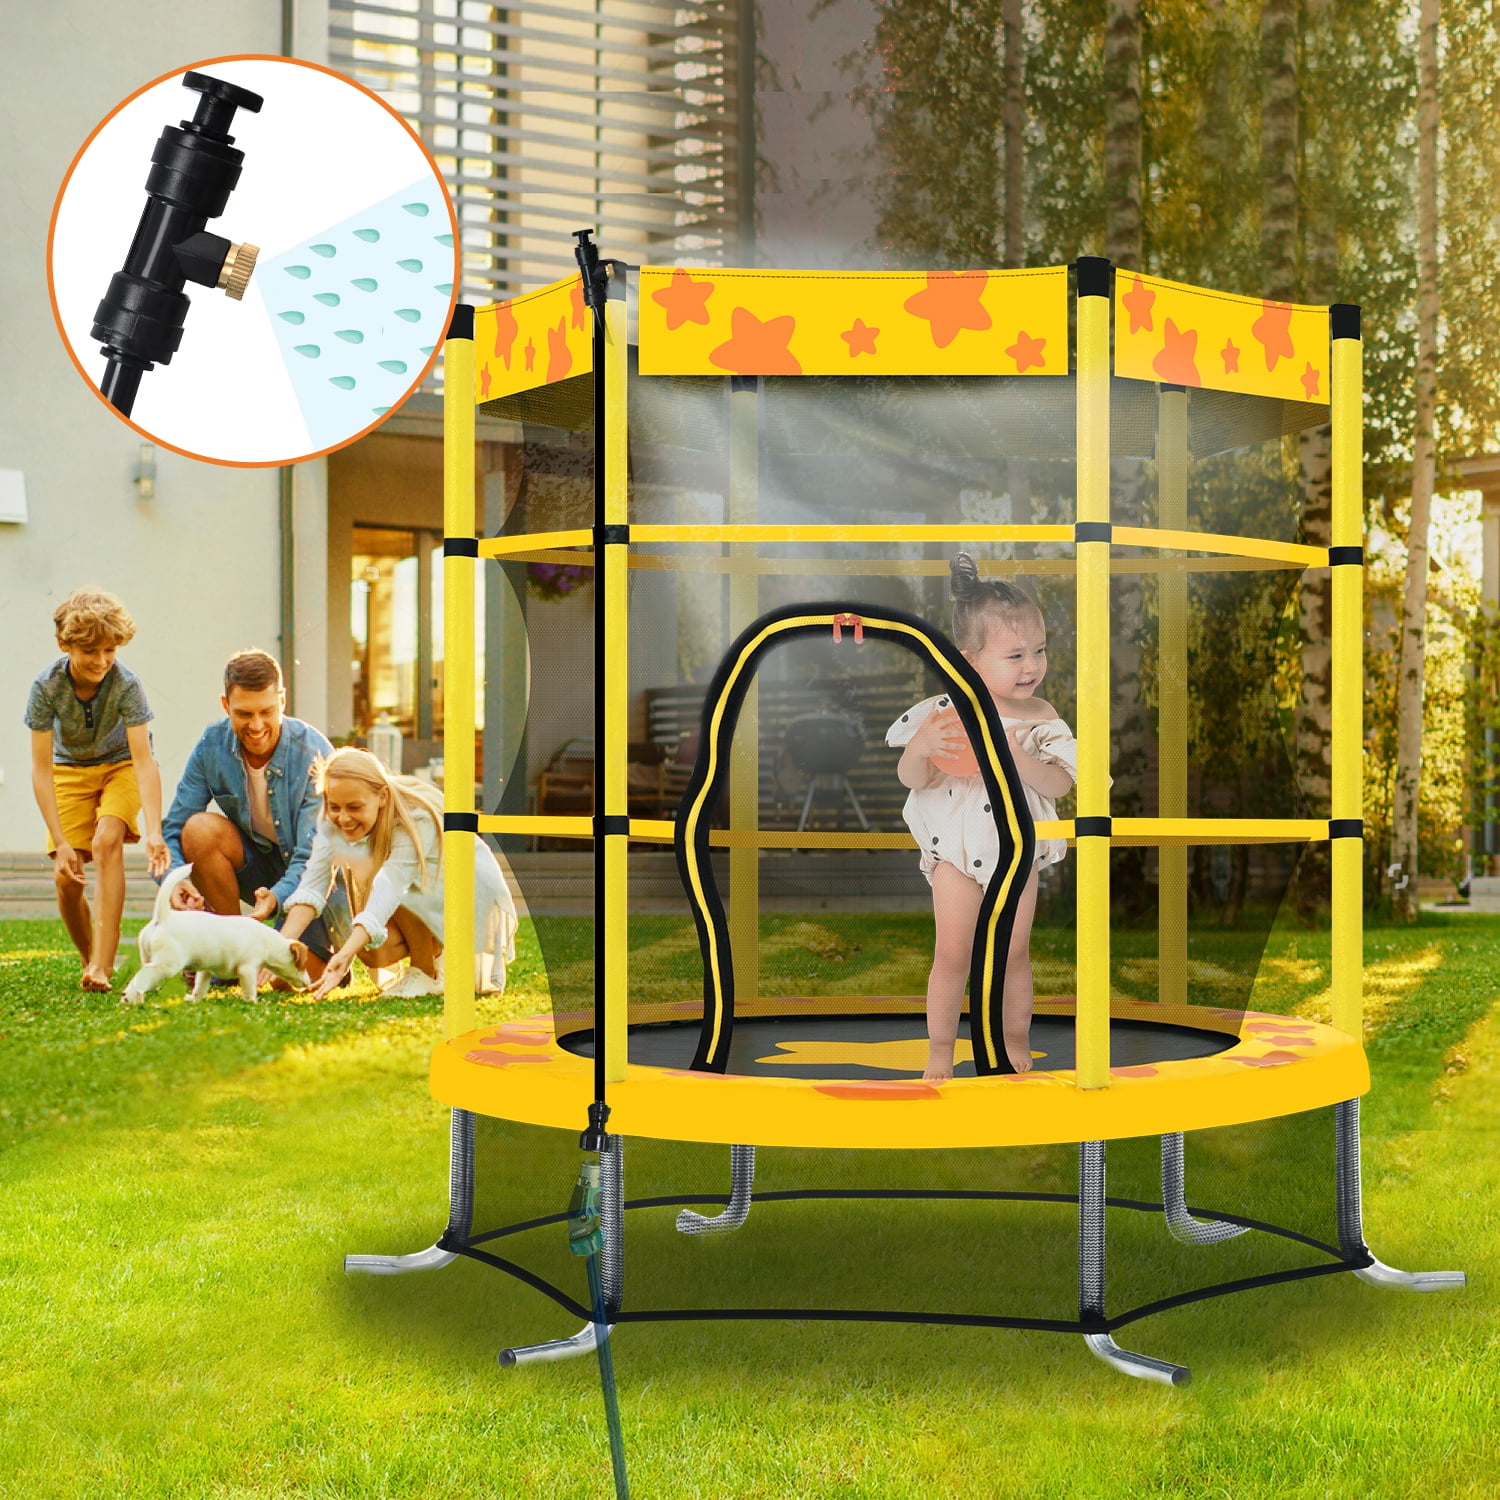 55-Inch Indoor Outdoor Small Trampoline for Boys Girls, Trampoline Little Trampoline with Safety Enclosure Net, Water Sprinkler, Toddler Trampoline Max Load 100lbs, Yellow - Walmart.com